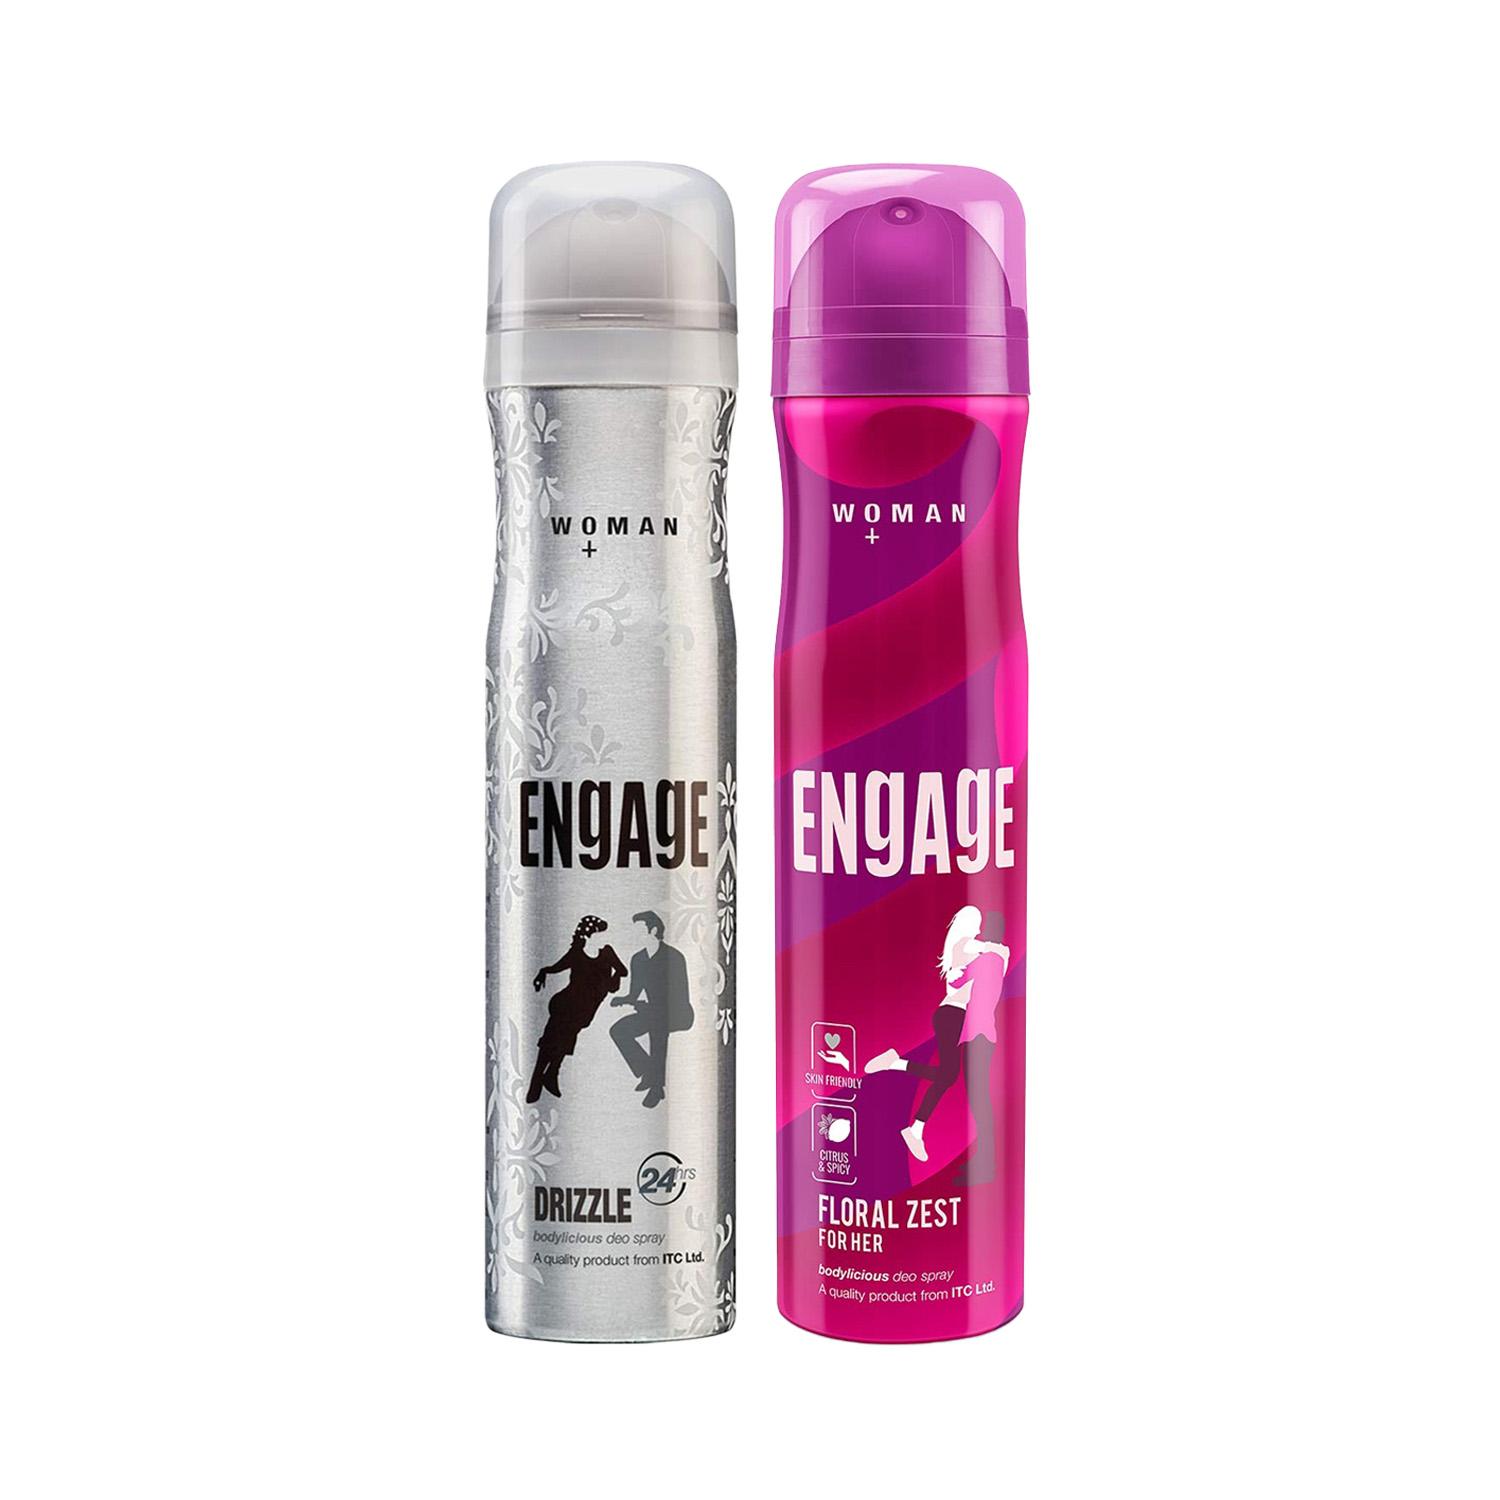 Engage | Engage Drizzle Deodorant Spray (150 ml) & Floral Zest Deodorant Sprays For Women (150 ml) Combo